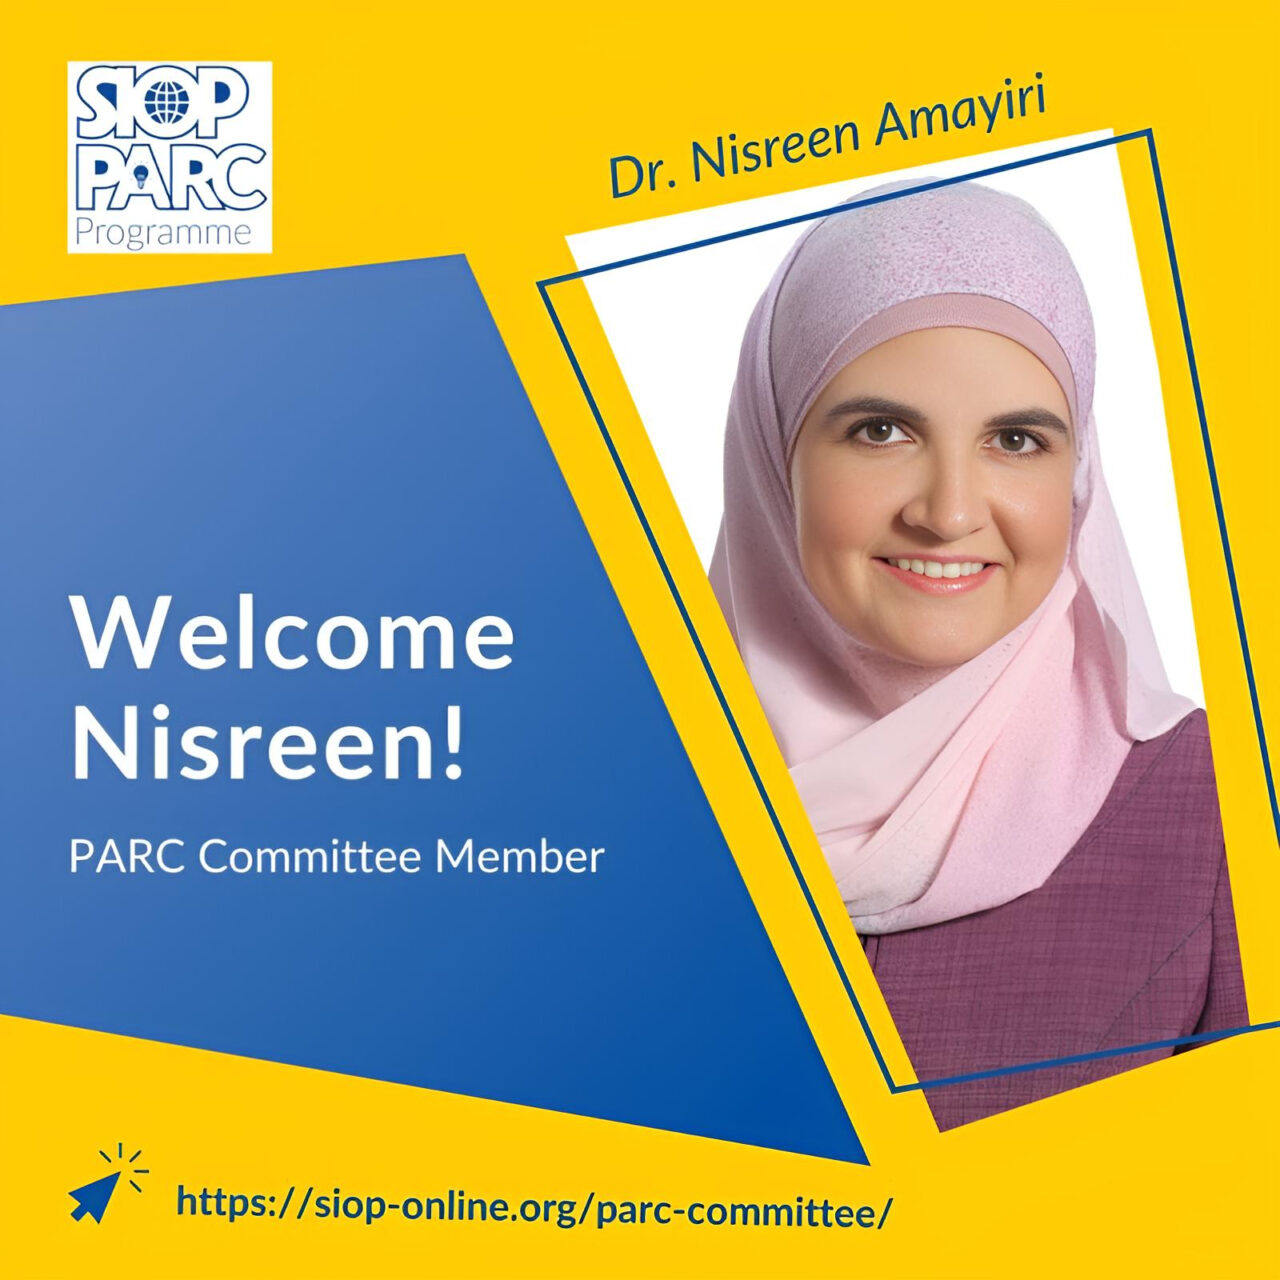 Congratulations to Nisreen Amayiri on joining the Programme for Advancing the Research Capacity Committee for a term of 3 years – SIOP